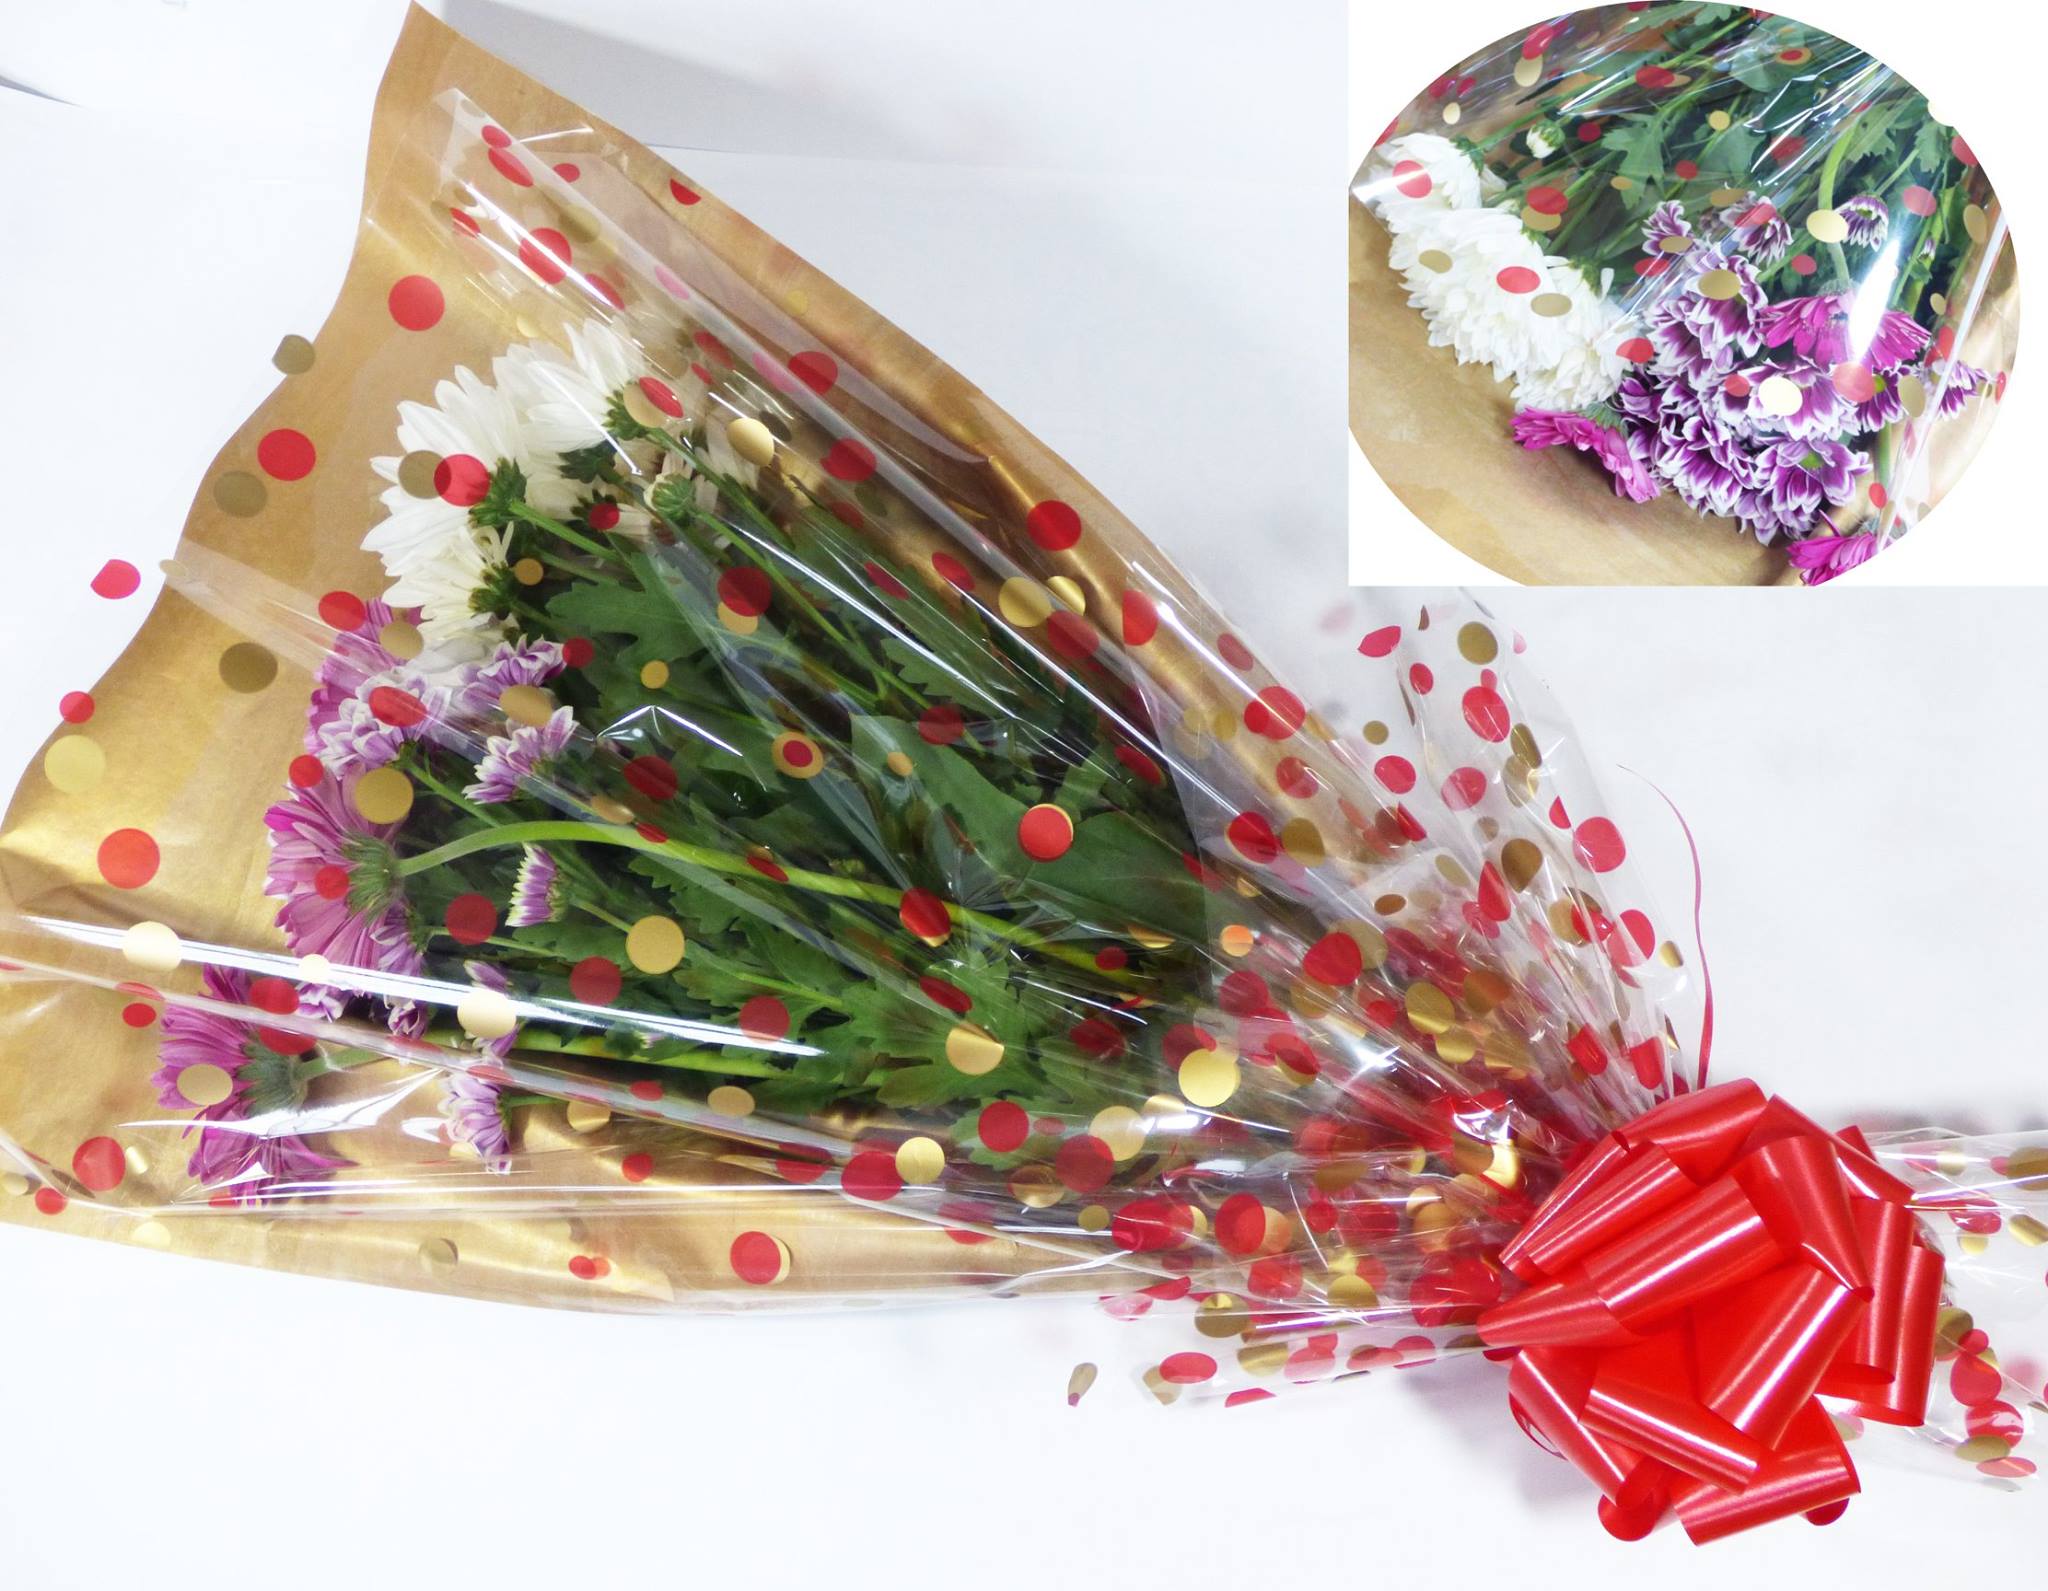 HOW TO GIFT FLOWERS